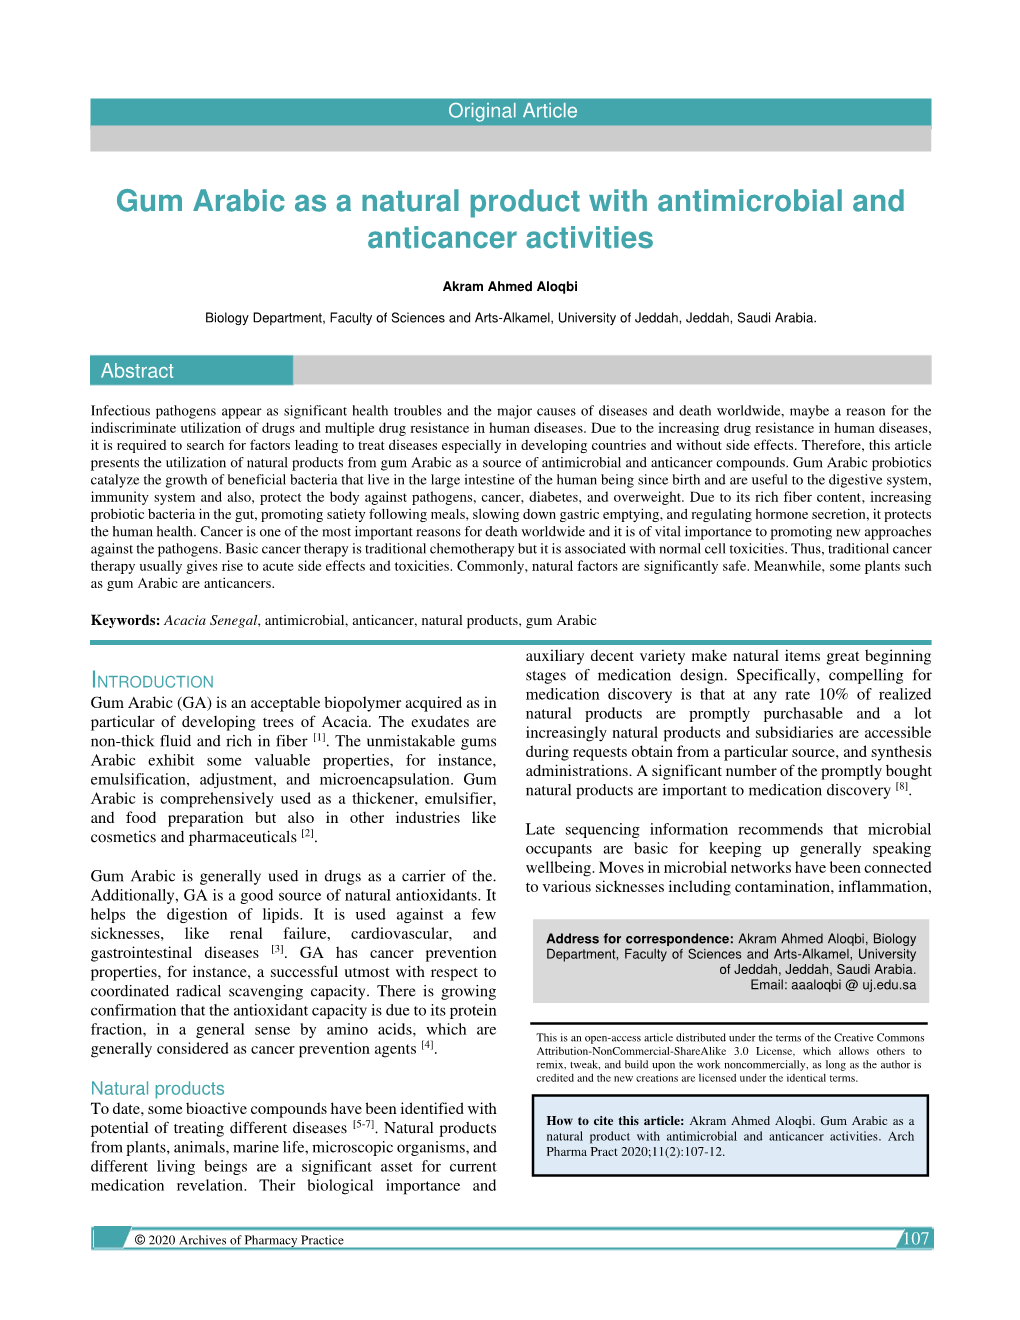 Gum Arabic As a Natural Product with Antimicrobial and Anticancer Activities